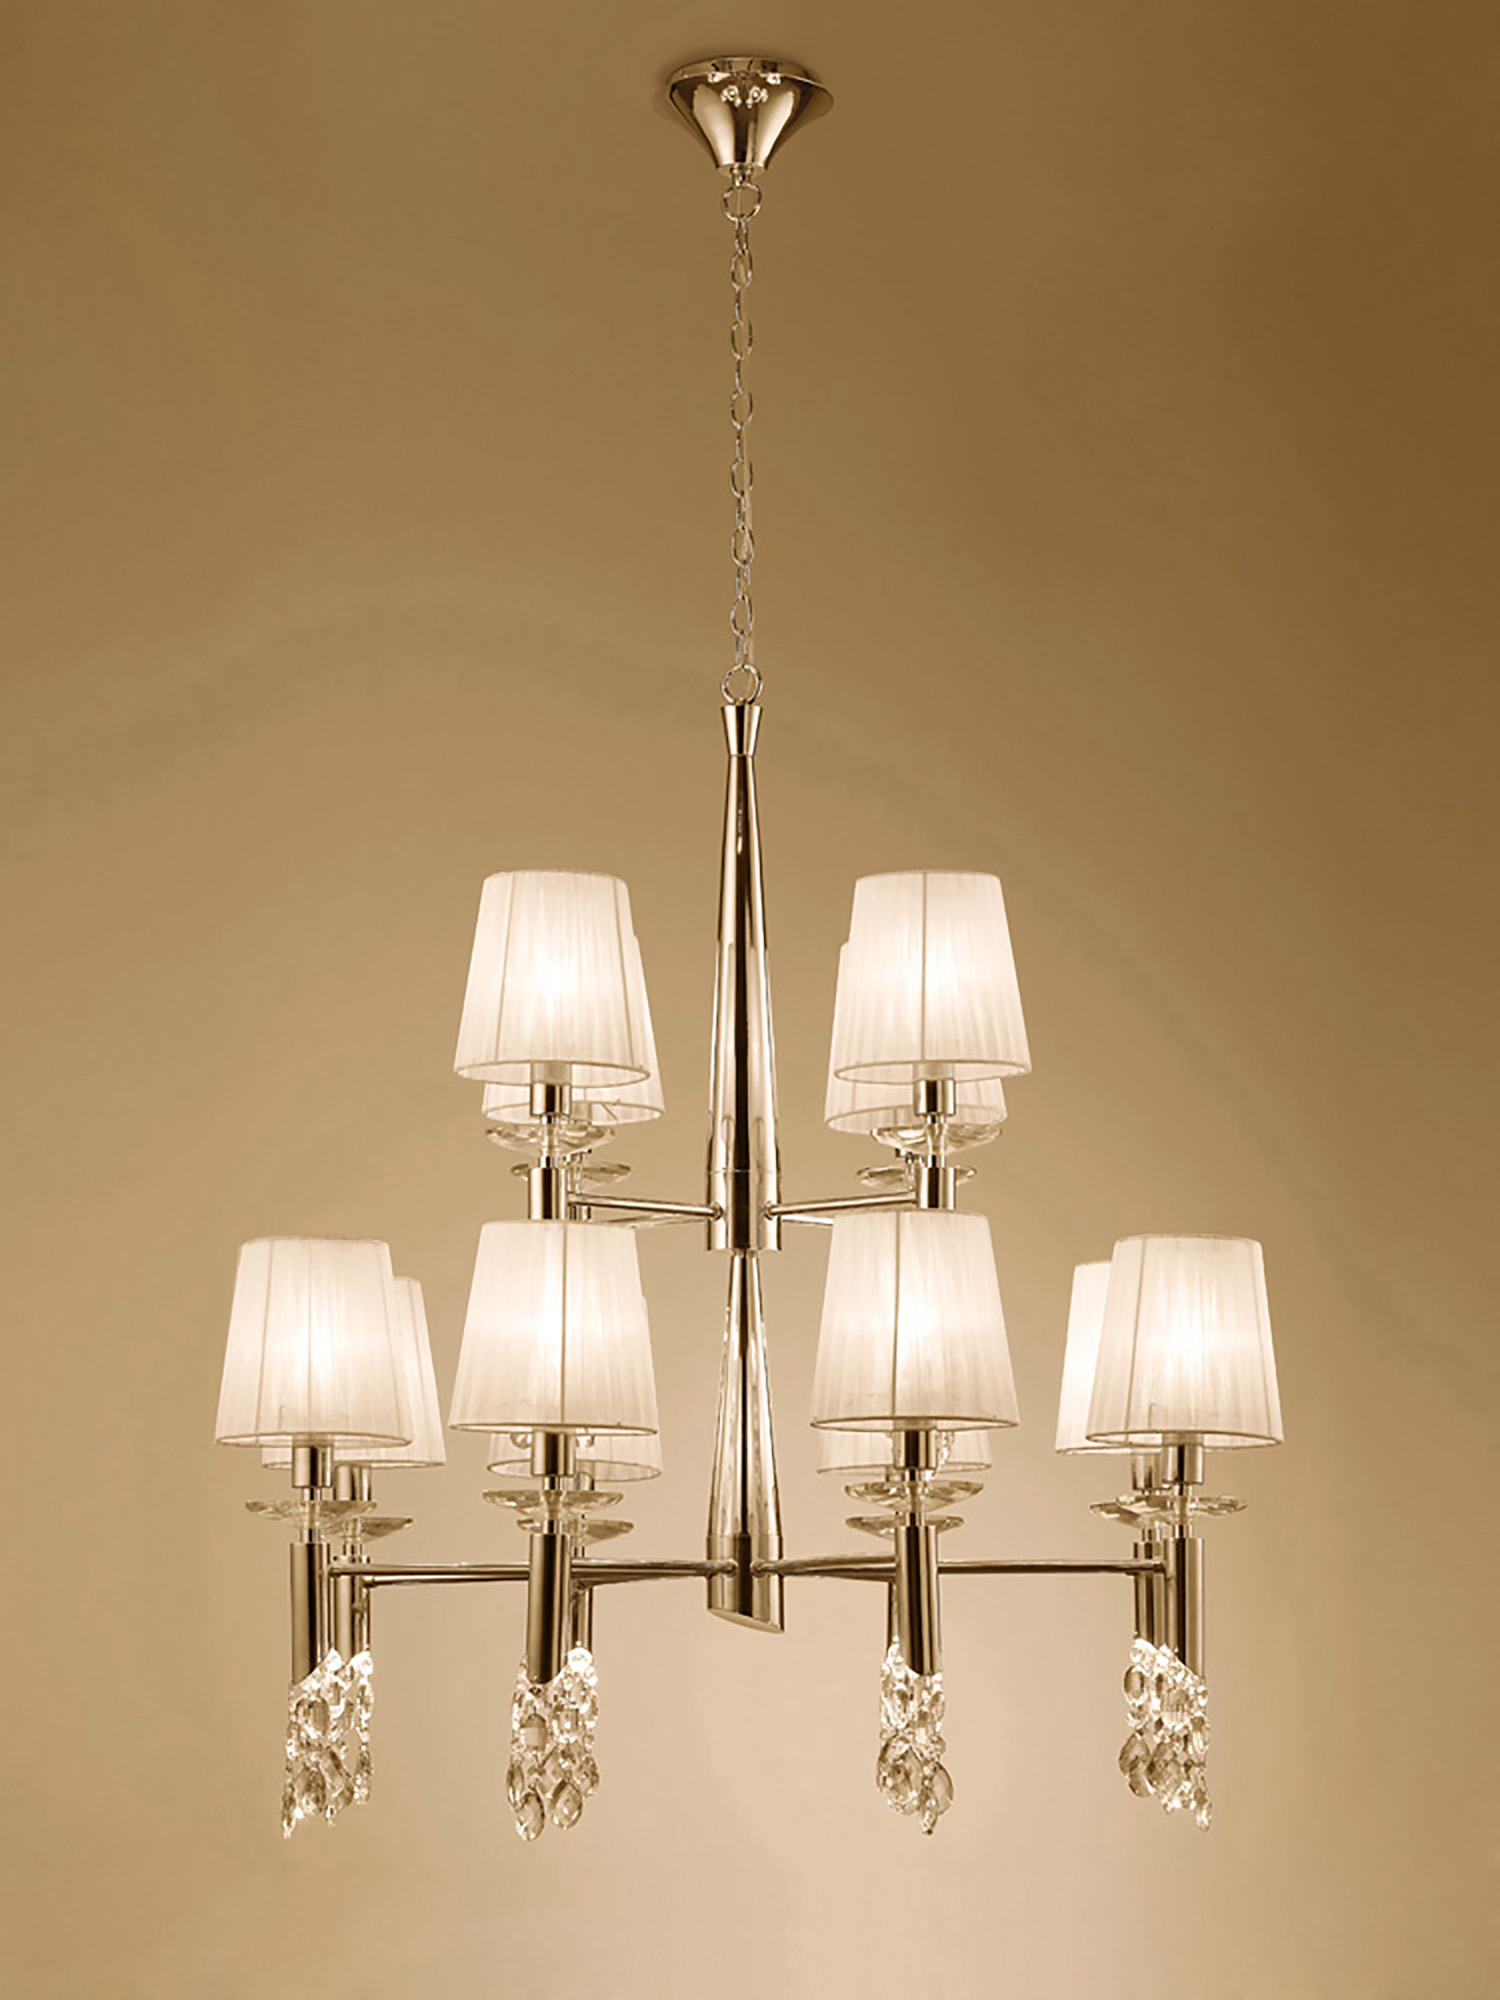 Tiffany FG Crystal Ceiling Lights Mantra Tiered Crystal Fittings